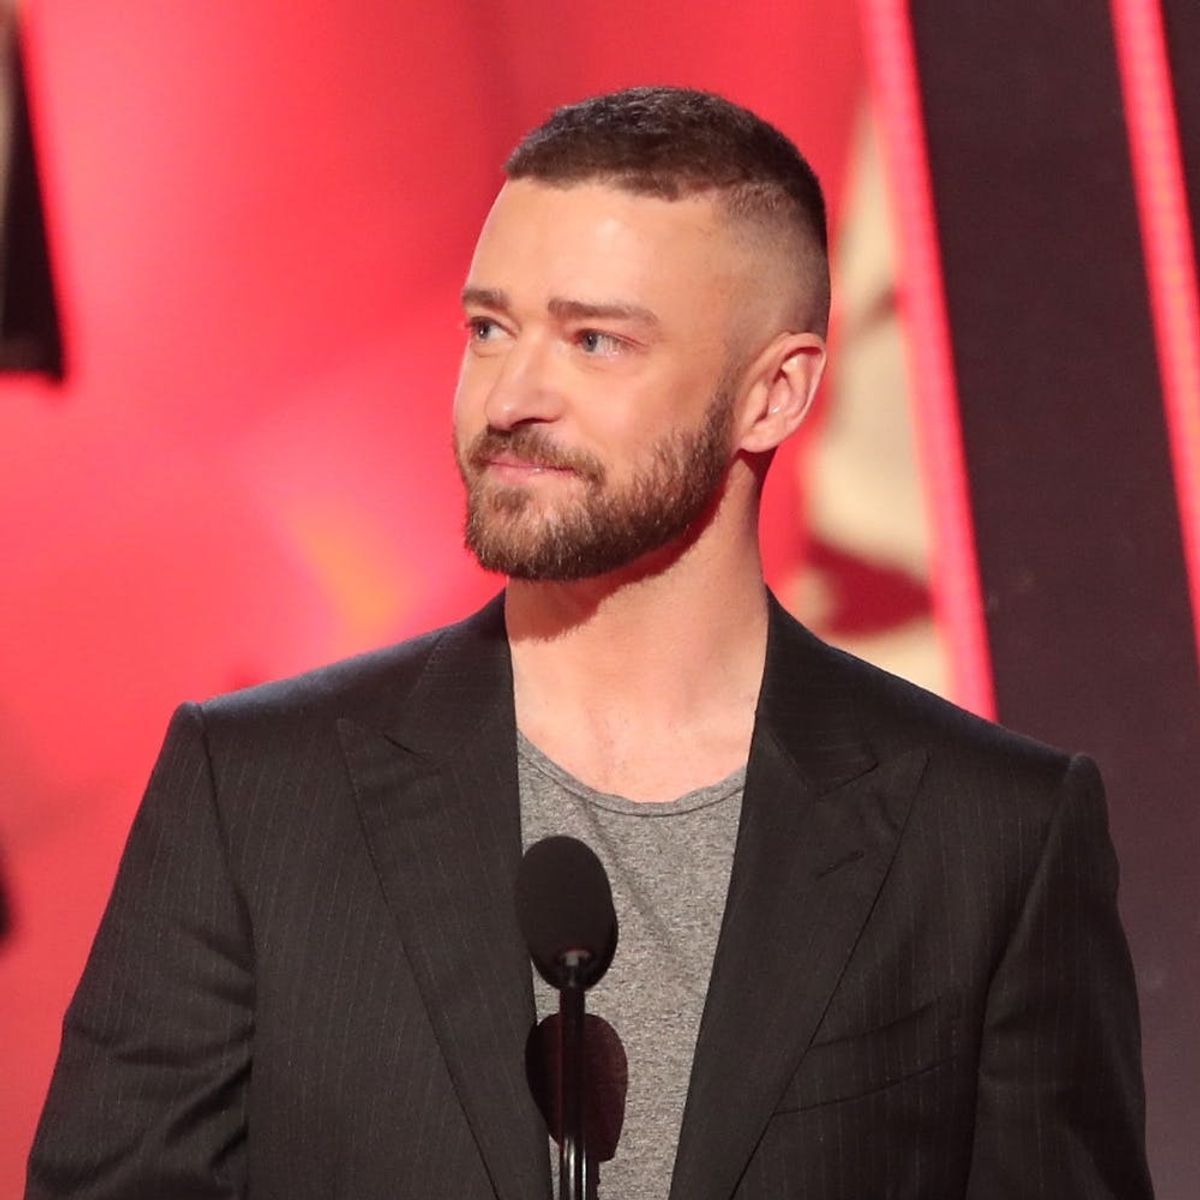 Justin Timberlake’s Speech to LGBTQ Youth at the iHeartRadio Music Awards Was MUTED